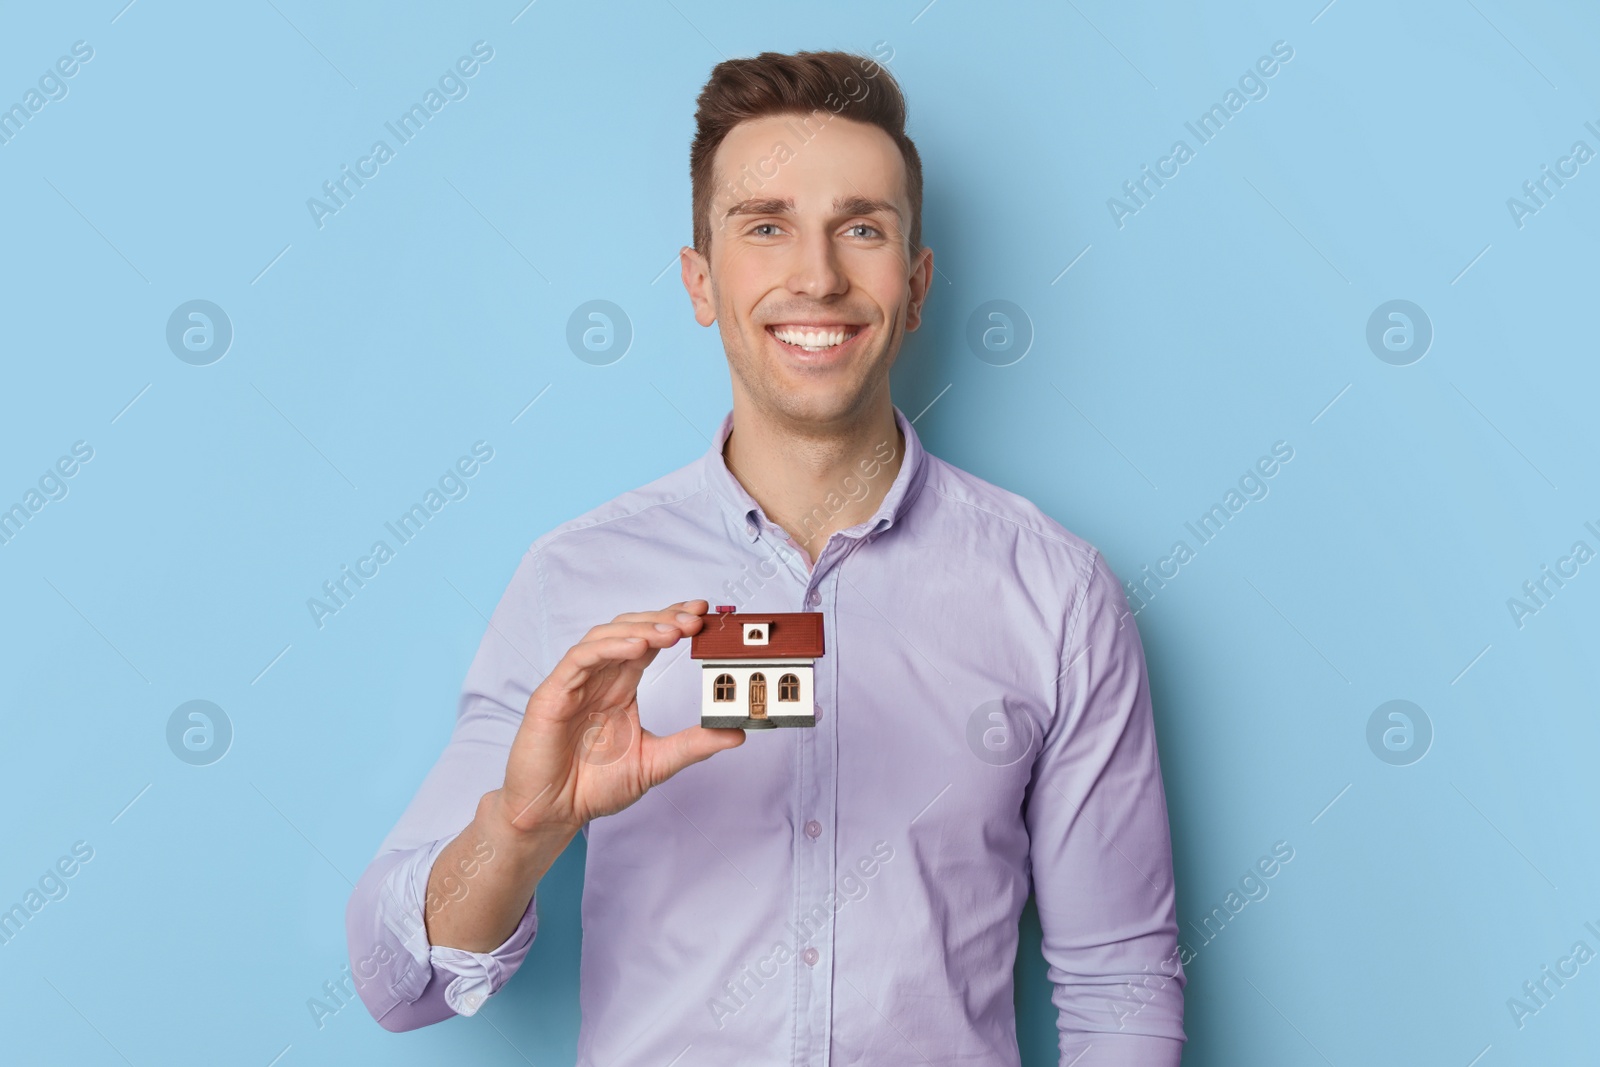 Photo of Male real estate agent with house model on light background